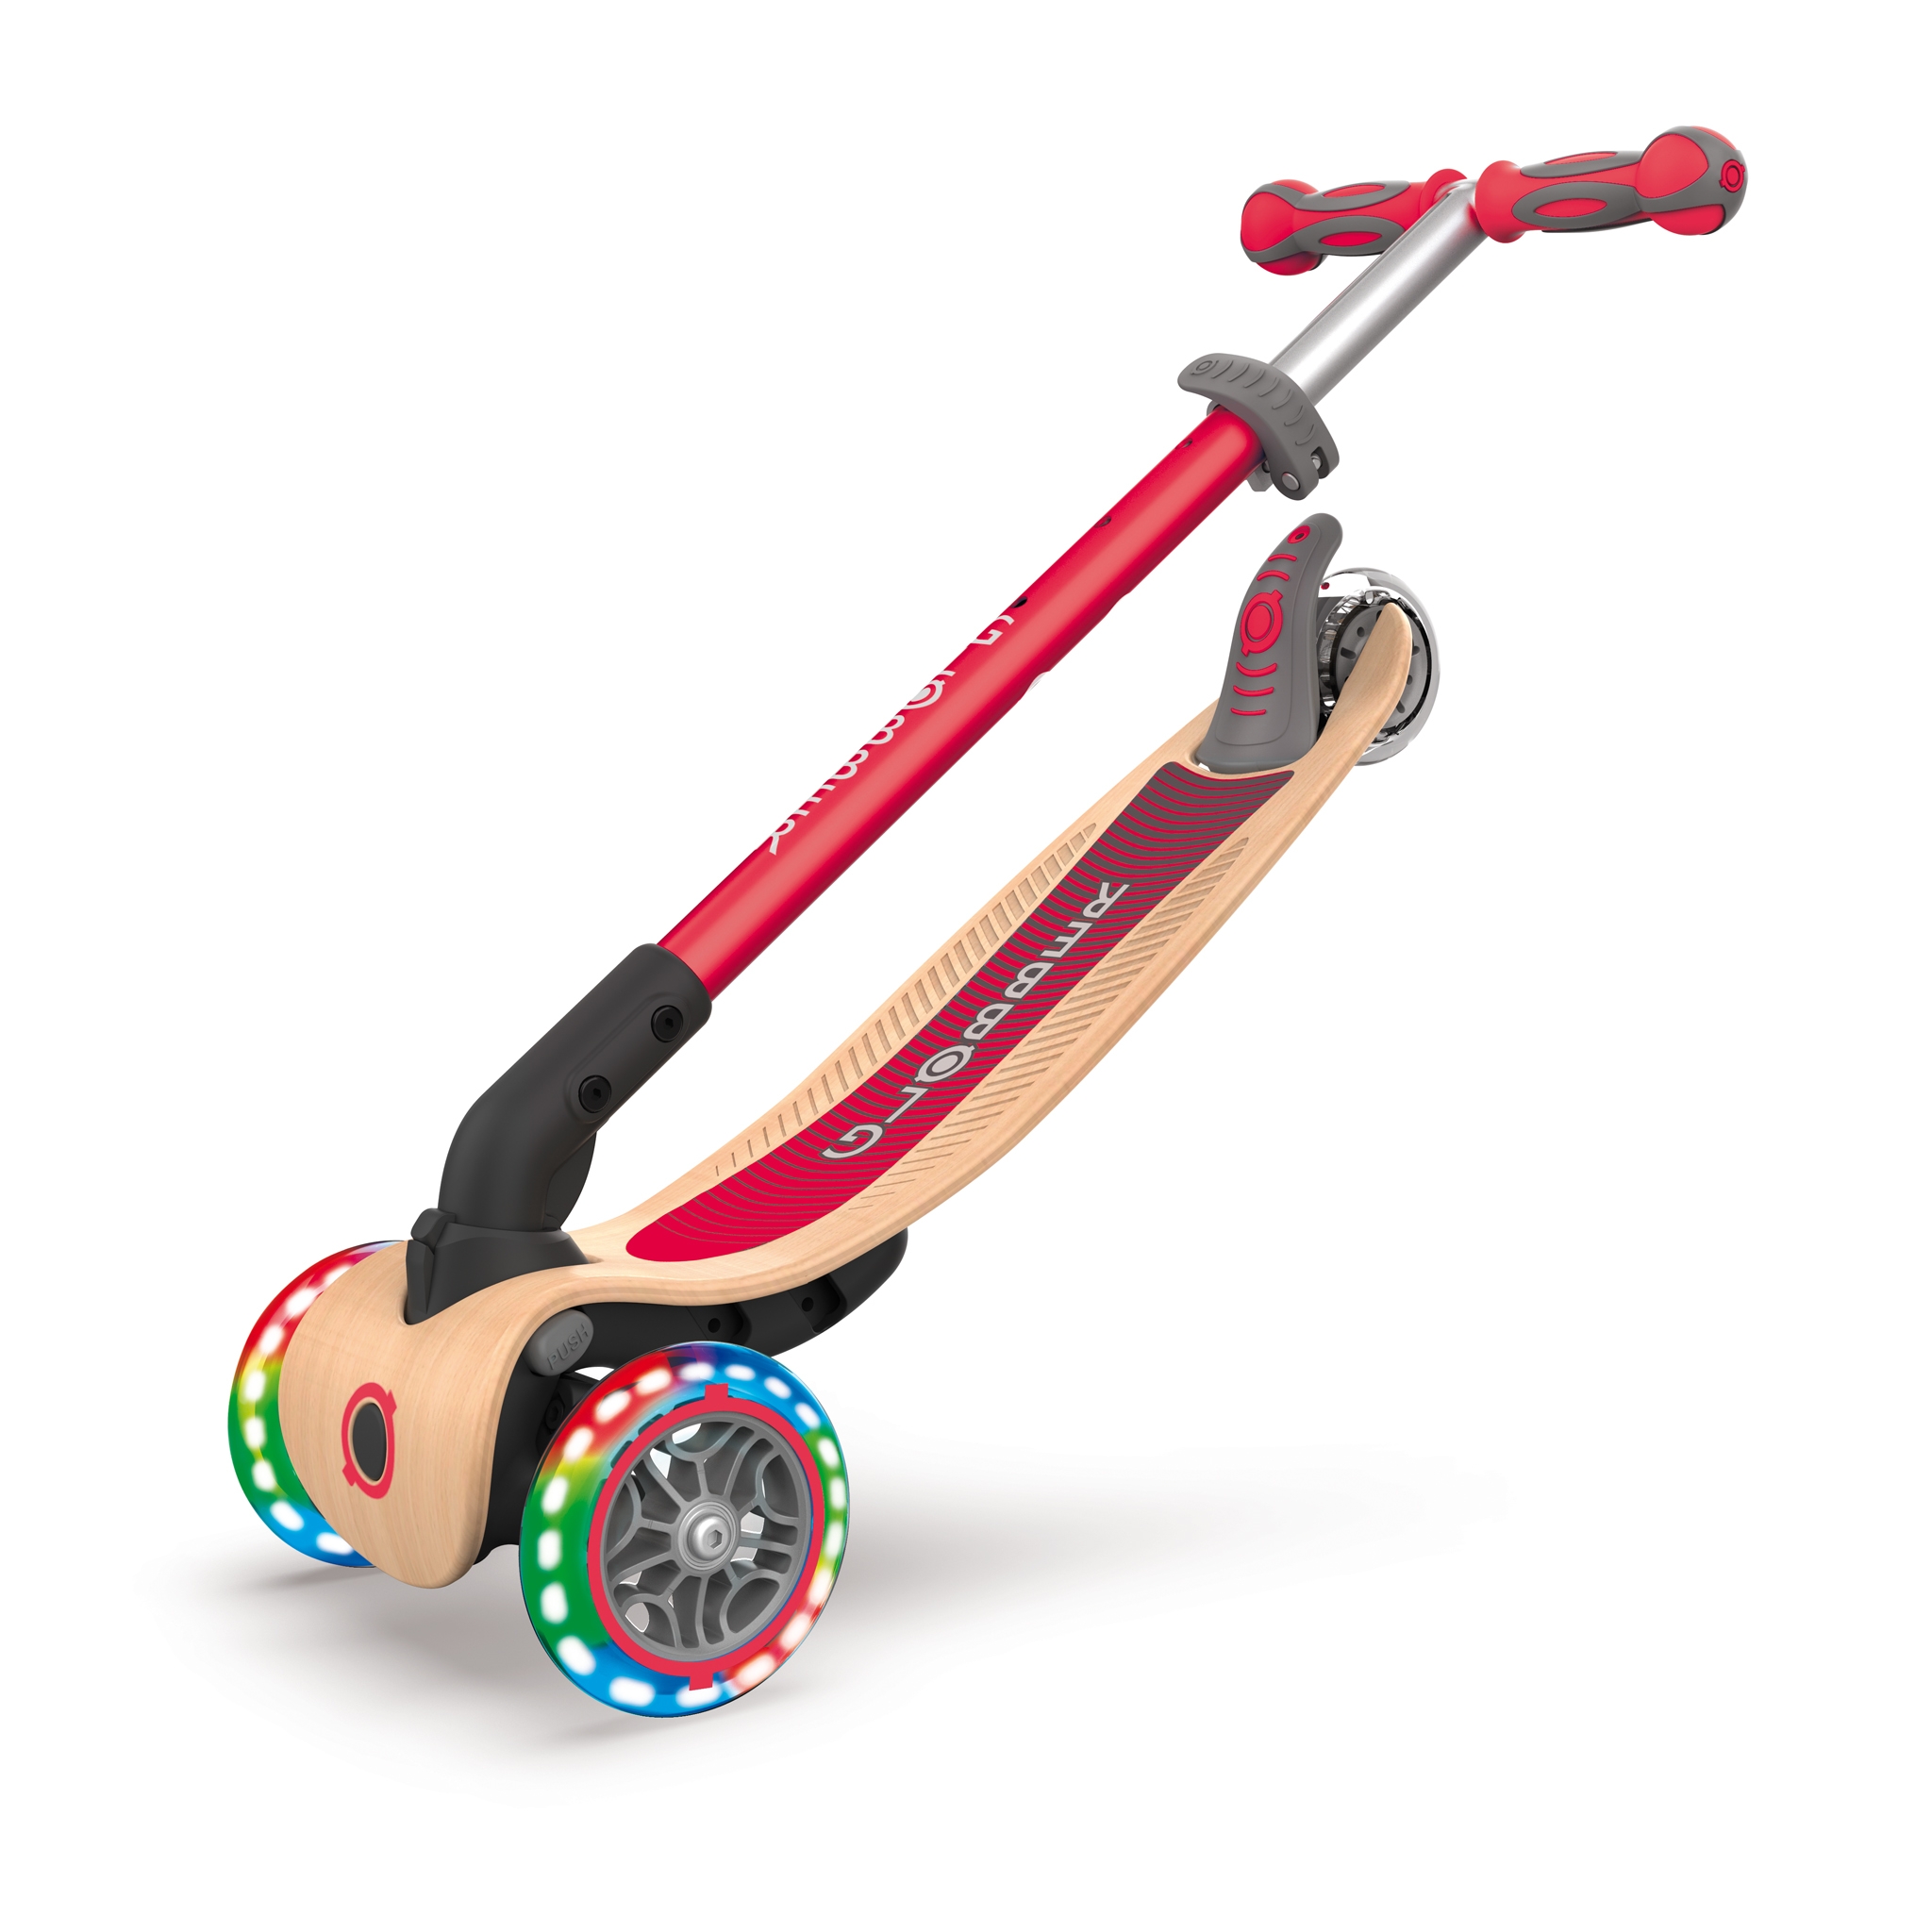 PRIMO-FOLDABLE-WOOD-LIGHTS-3-wheel-foldable-light-up-scooter-with-7-ply-wooden-scooter-deck-trolley-mode-compatible_new-red 5